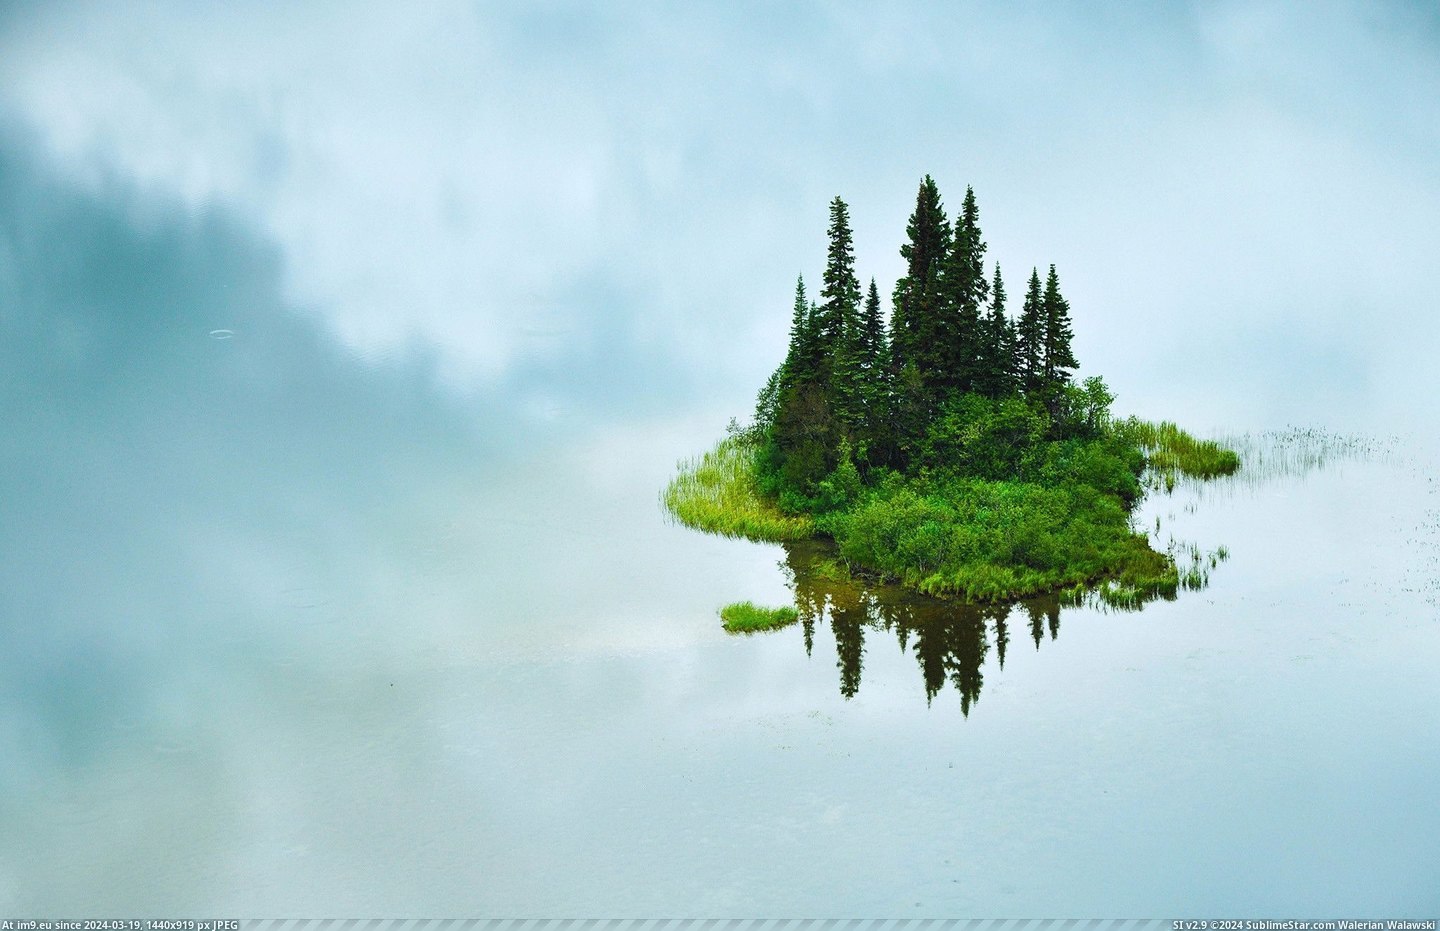 #Lake #Tiny #Northern #Columbia #Tumuch #Island #British [Pics] A tiny island in the middle of Tumuch Lake in northern British Columbia Pic. (Obraz z album My r/PICS favs))